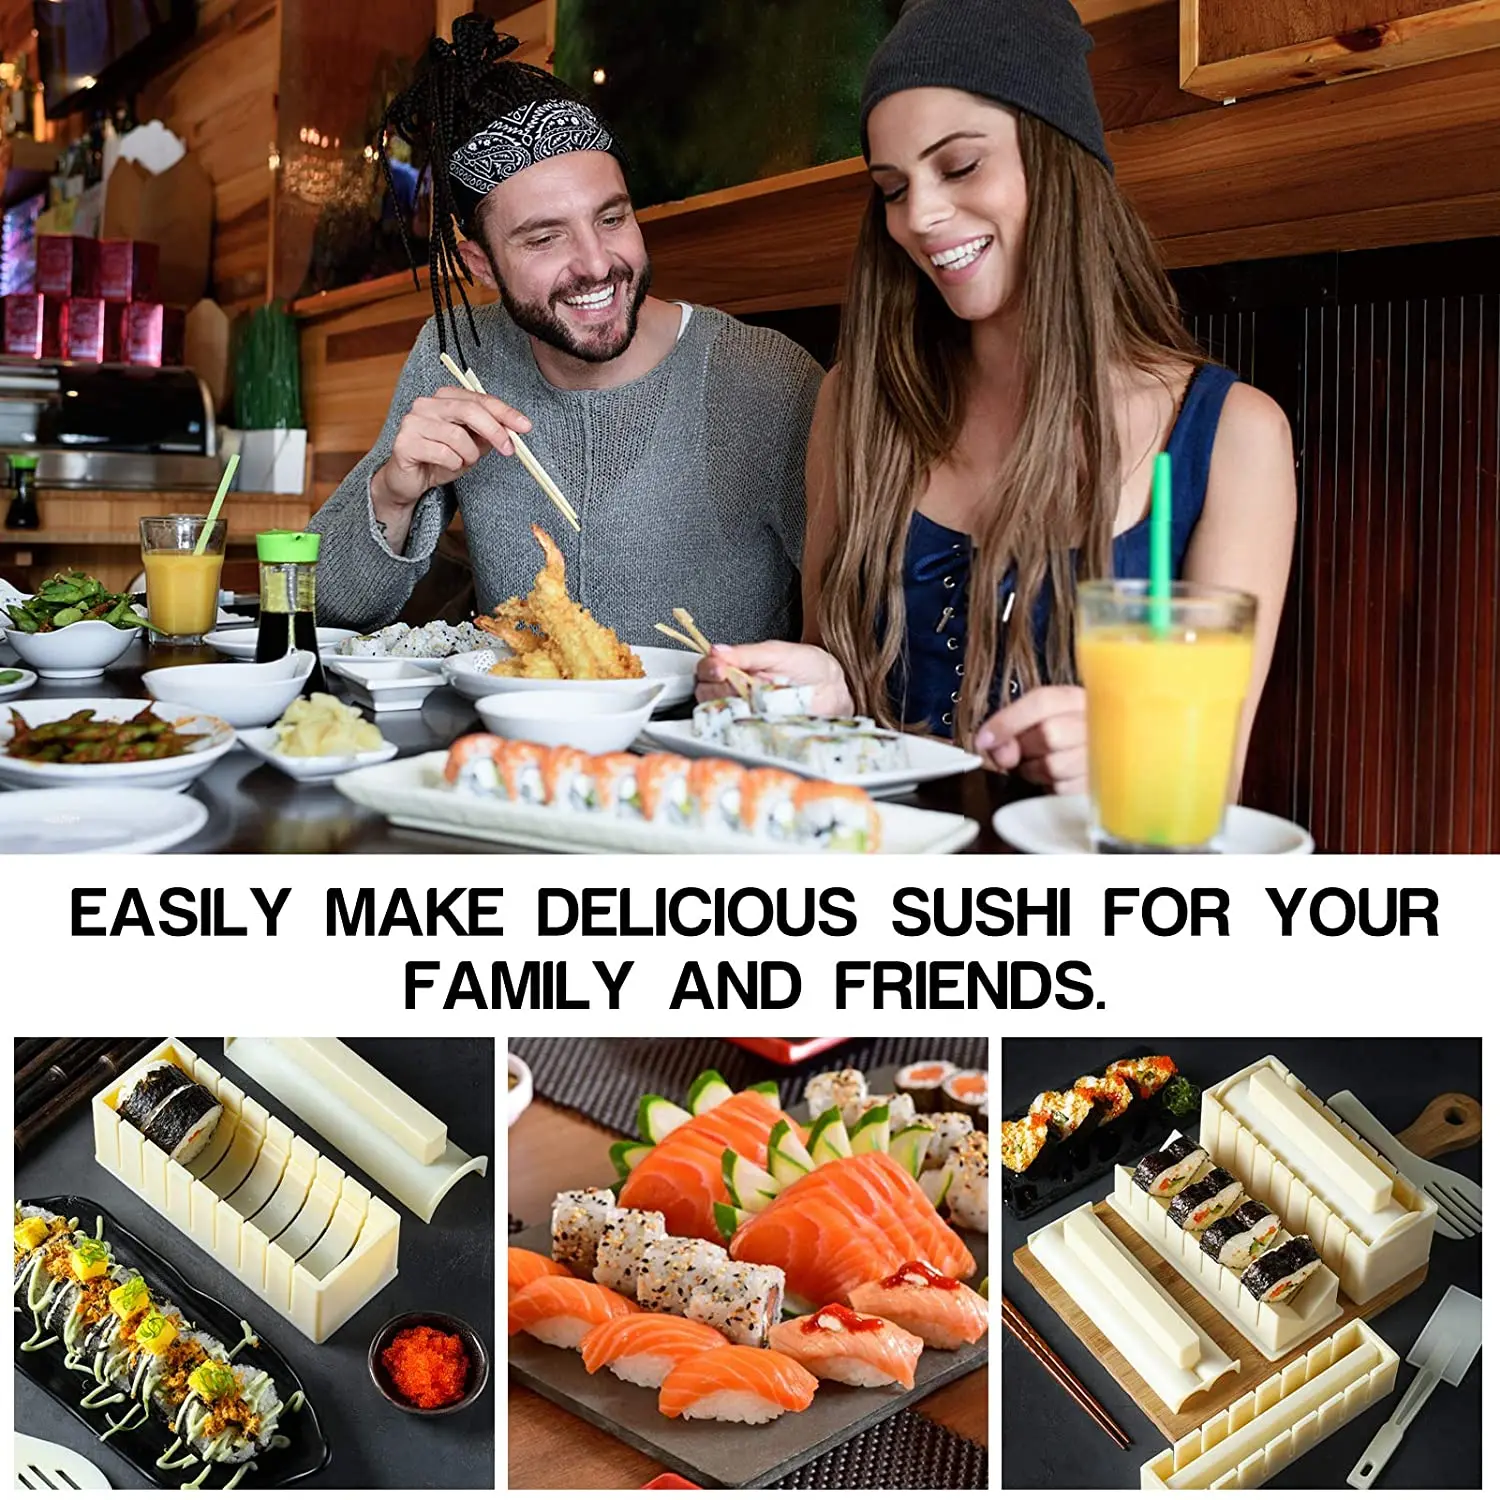 Meidong Sushi Making Kit Deluxe Edition with Complete Sushi Set 10 Pieces Plastic Sushi Maker Tool Complete with 8 Sushi Rice Roll Mold Shapes Fork Spatula